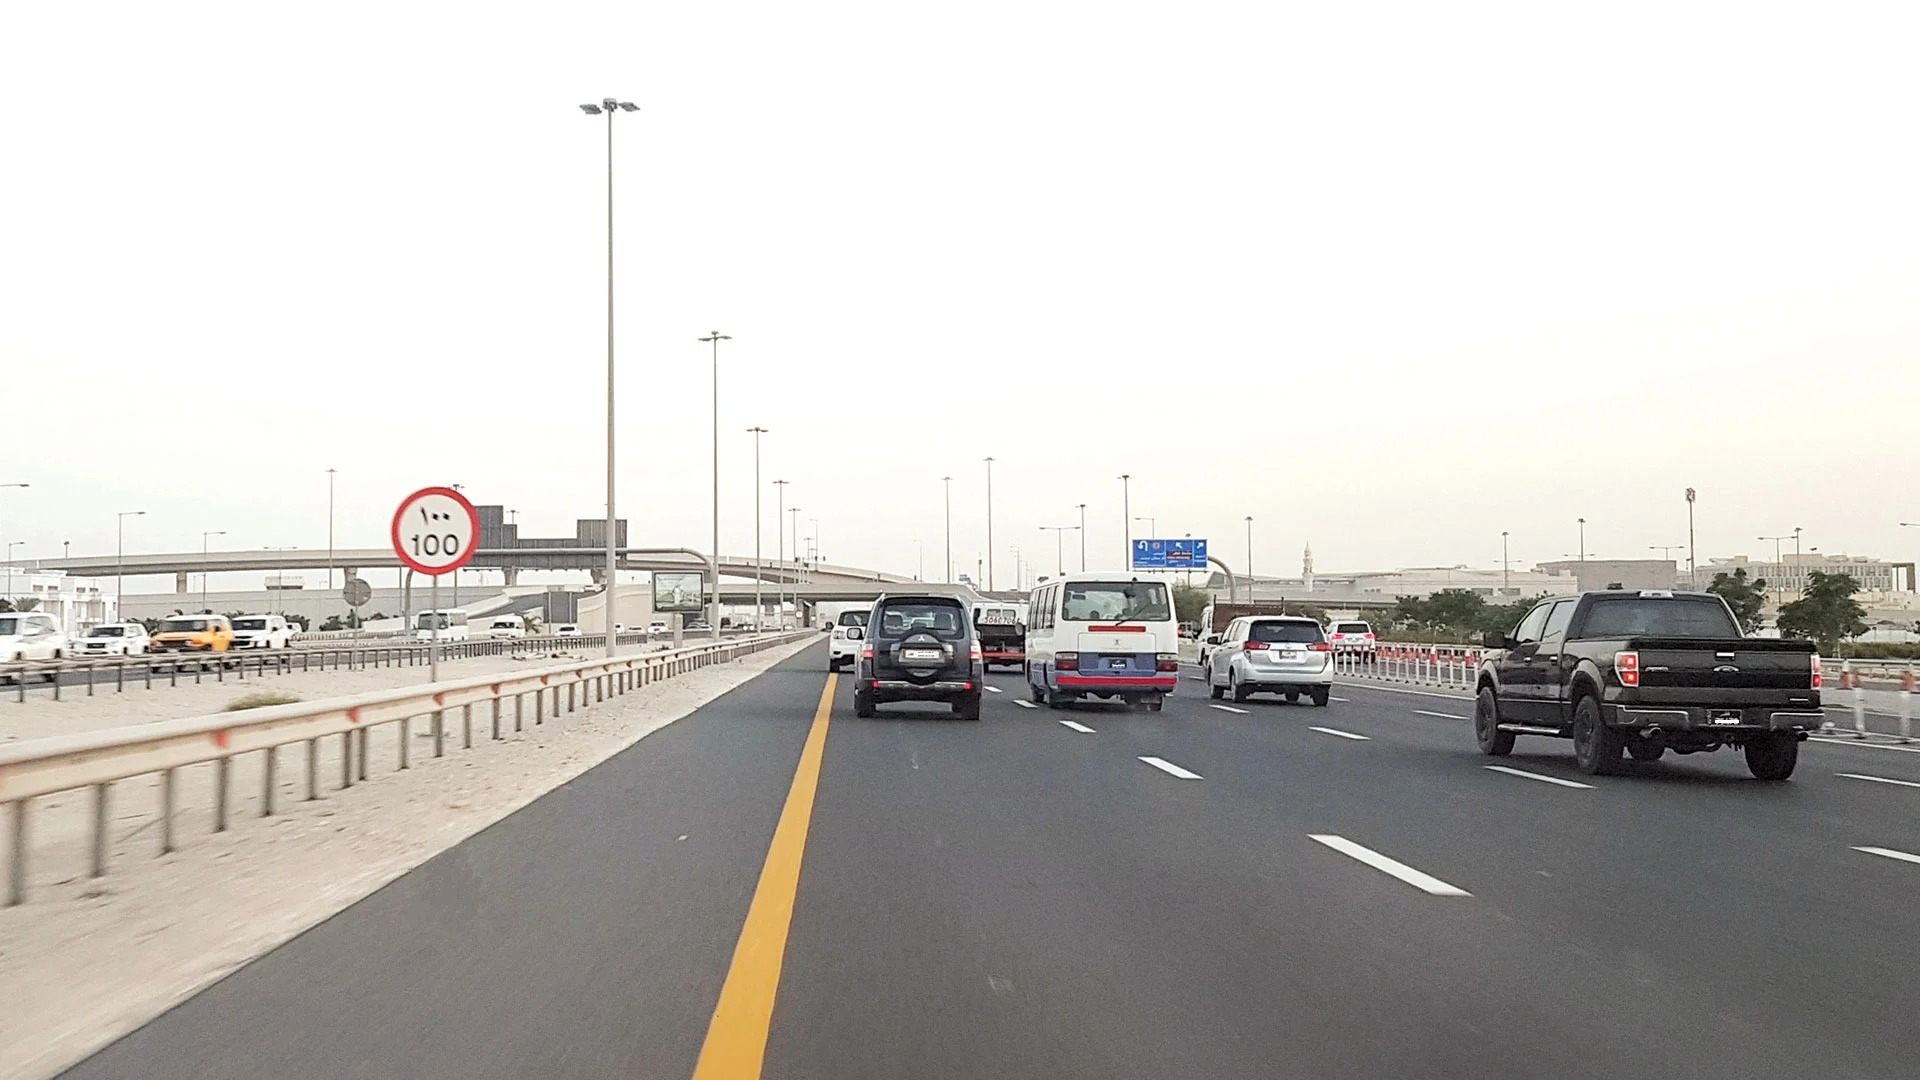 Why have speed limits been reduced on parts of Al-Shamal Road?